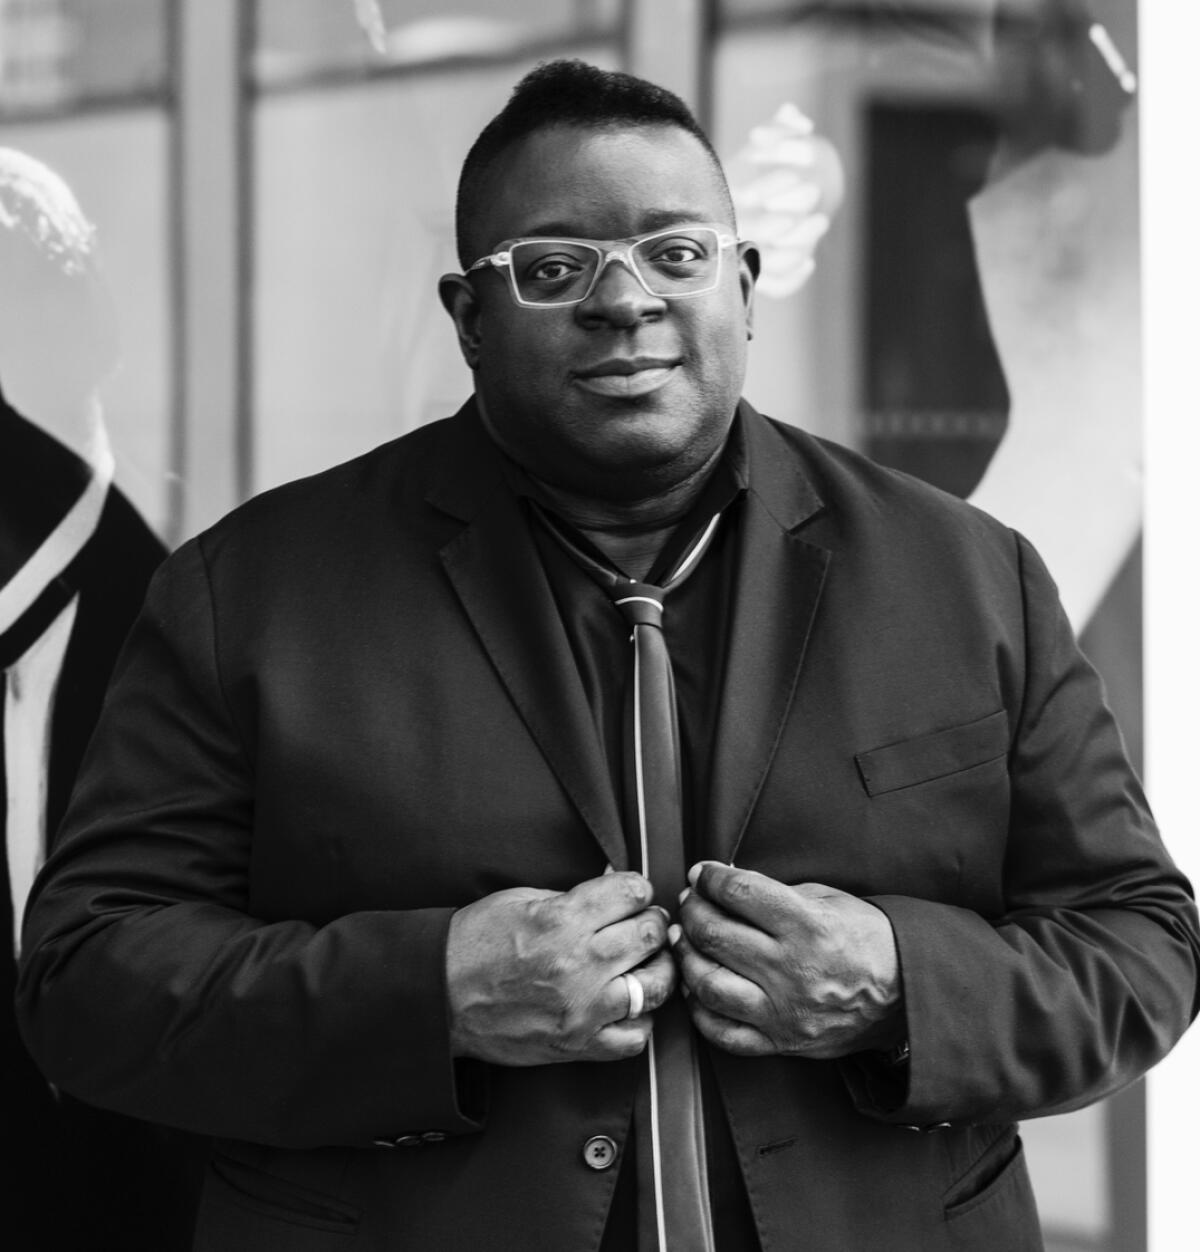 Isaac Julien said the new mural features a still from his 2013 film ‘Playtime,’ which looks at the role of capital and how it plays out in various characters’ lives.